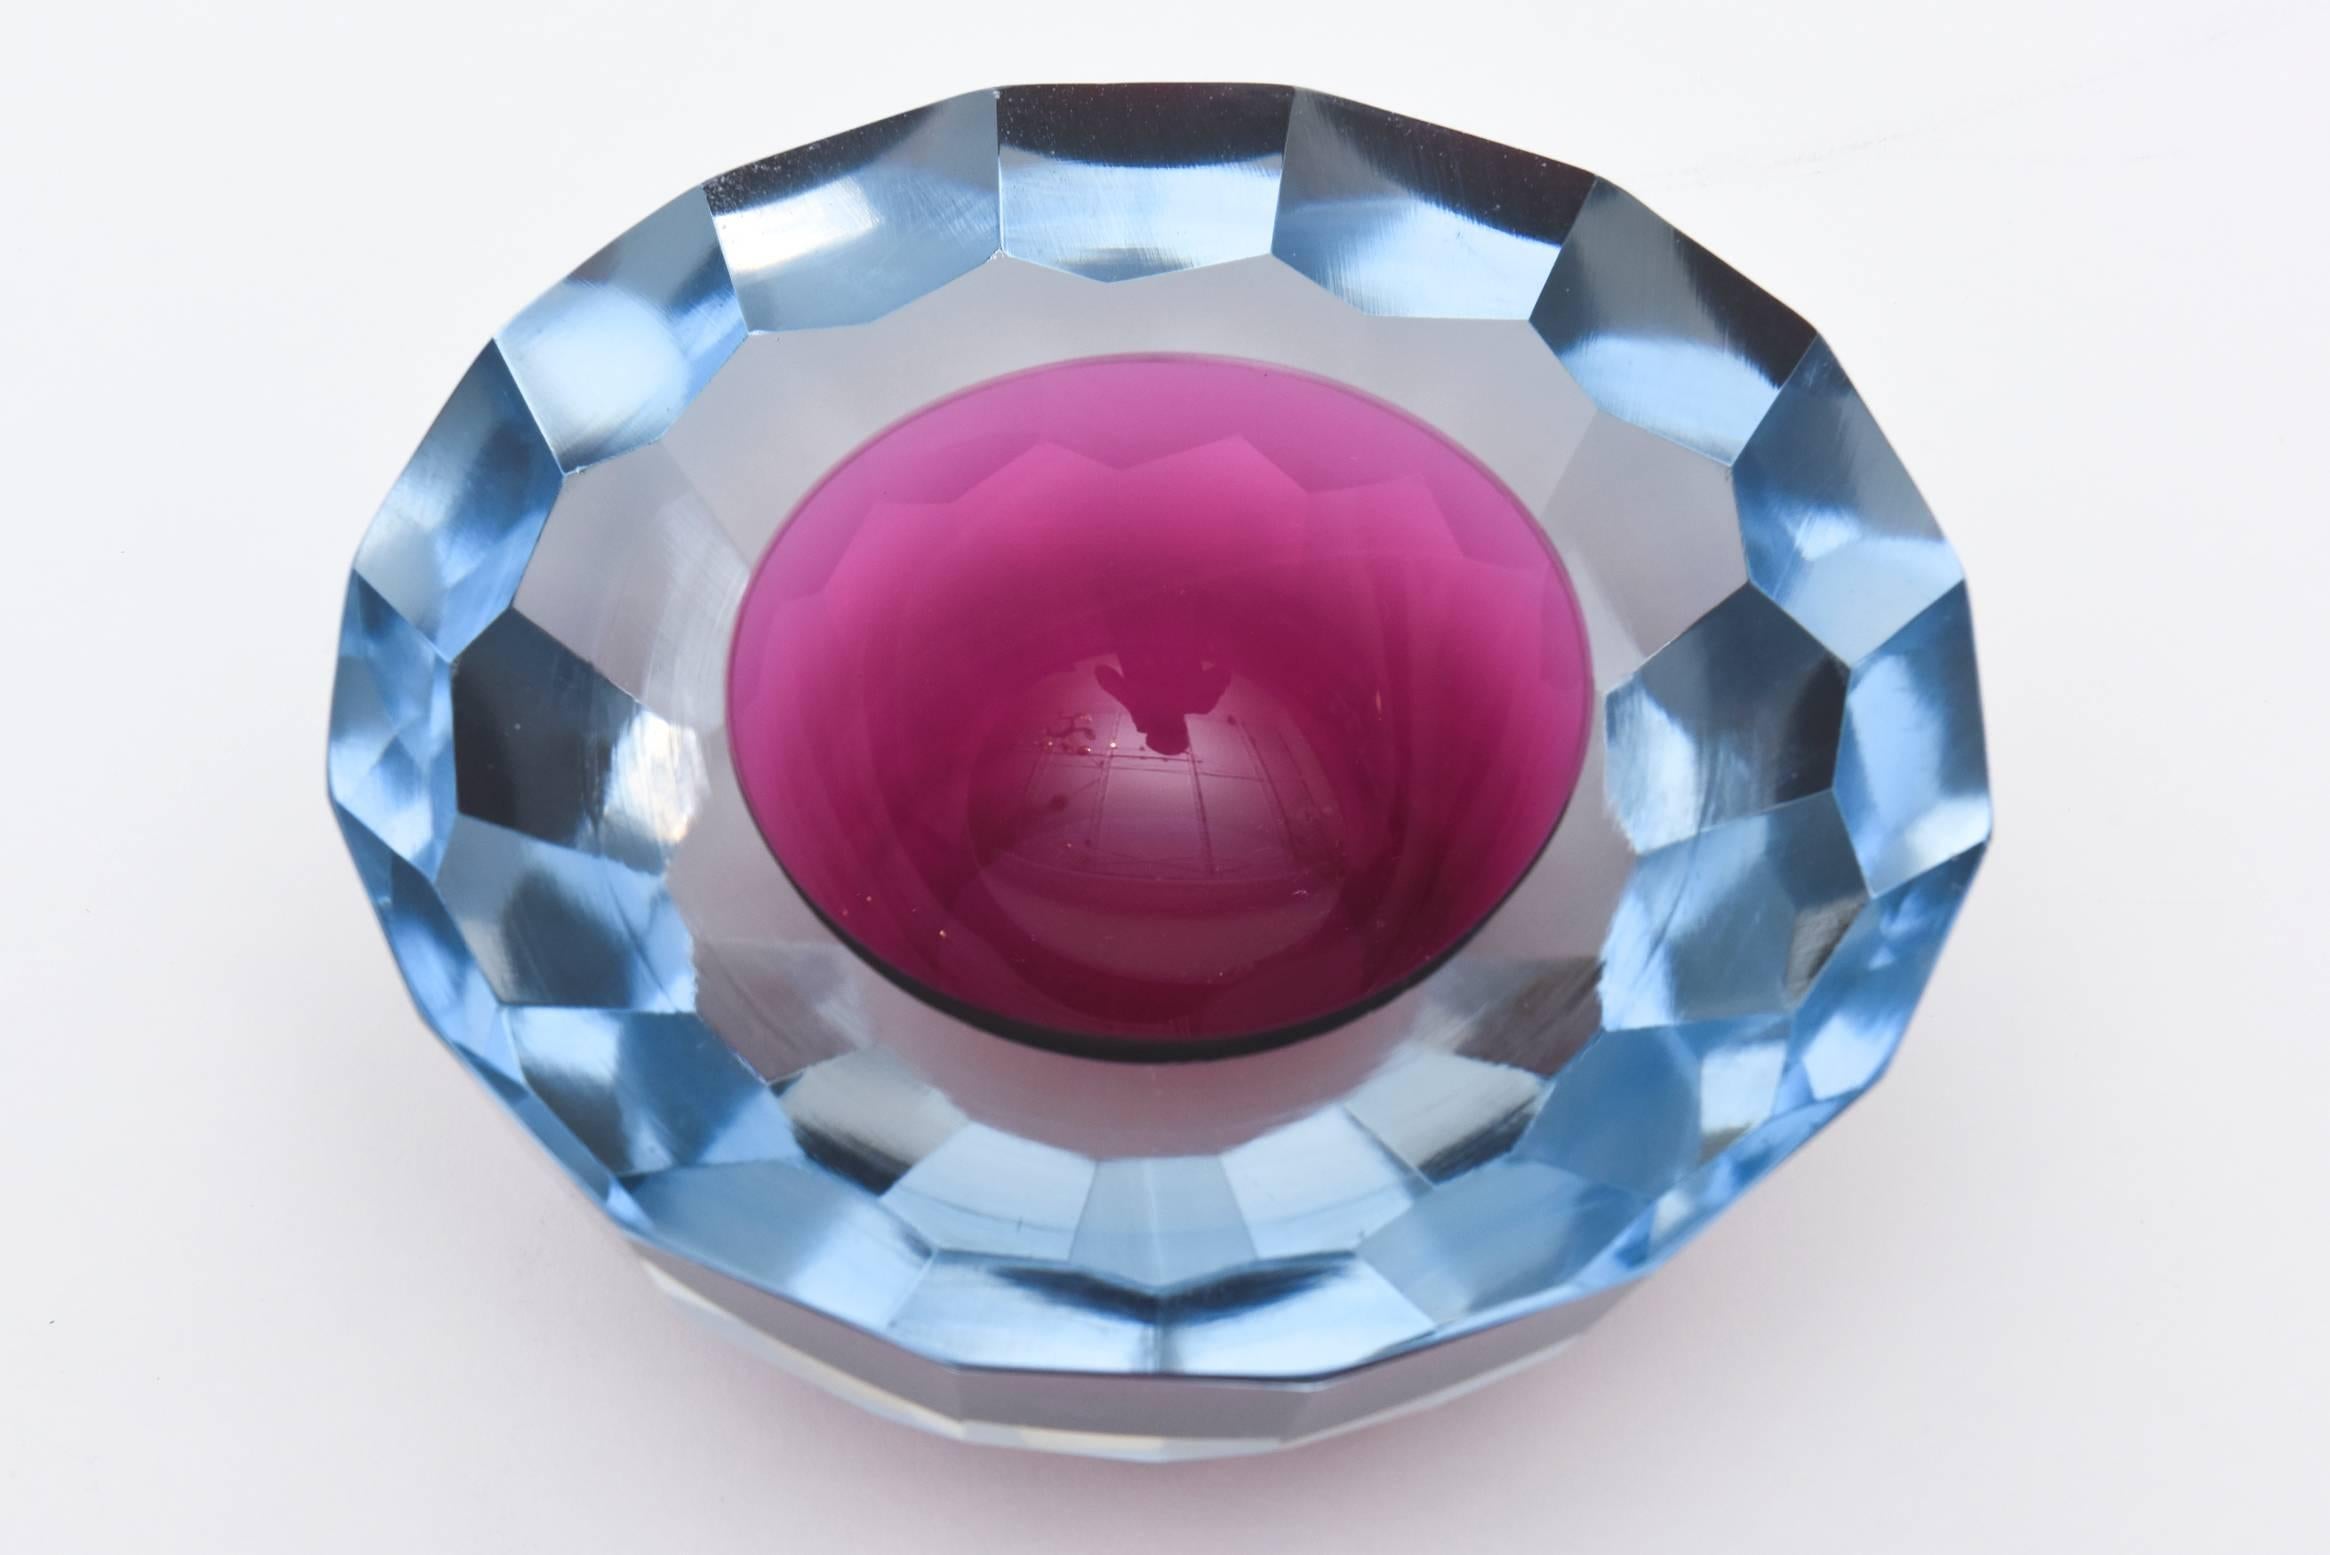 The brilliant colors of blue and violet of this spectacular and large diamond faceted flat cut polished glass Murano geode bowl is exquisite. These were also used for serving caviar.
When light hits the bowl, it glistens with radiance of color and